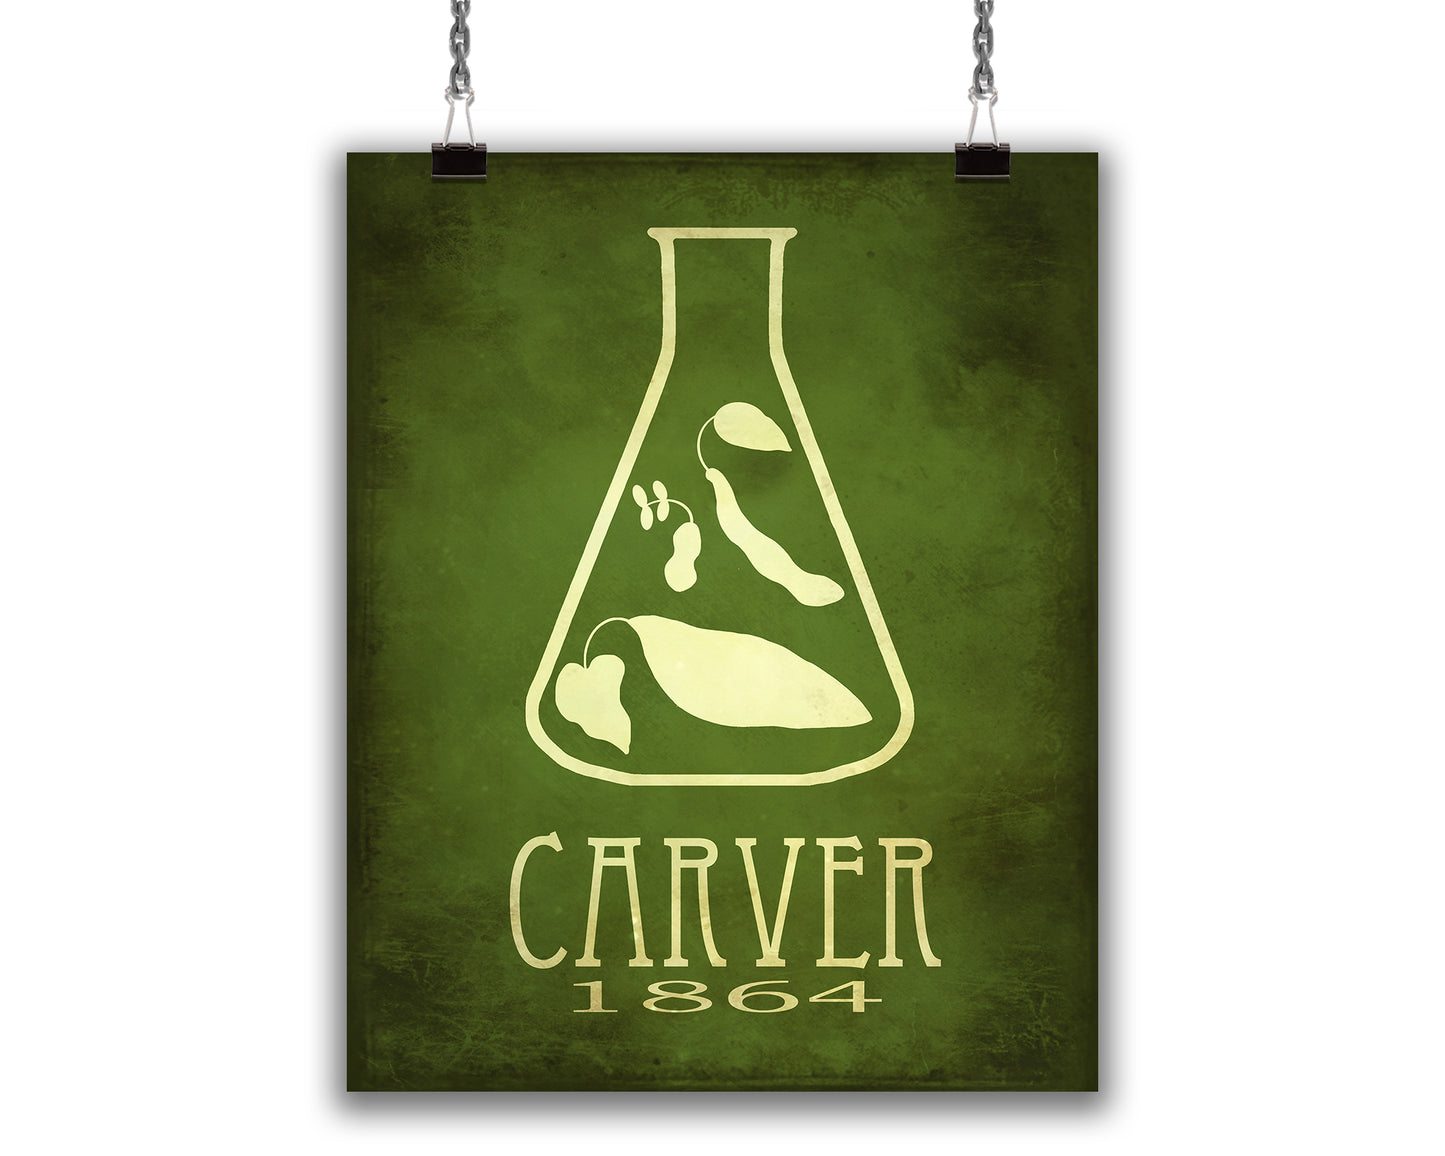 George Washington Carver Scientist Art Print, Agriculture and Inventor